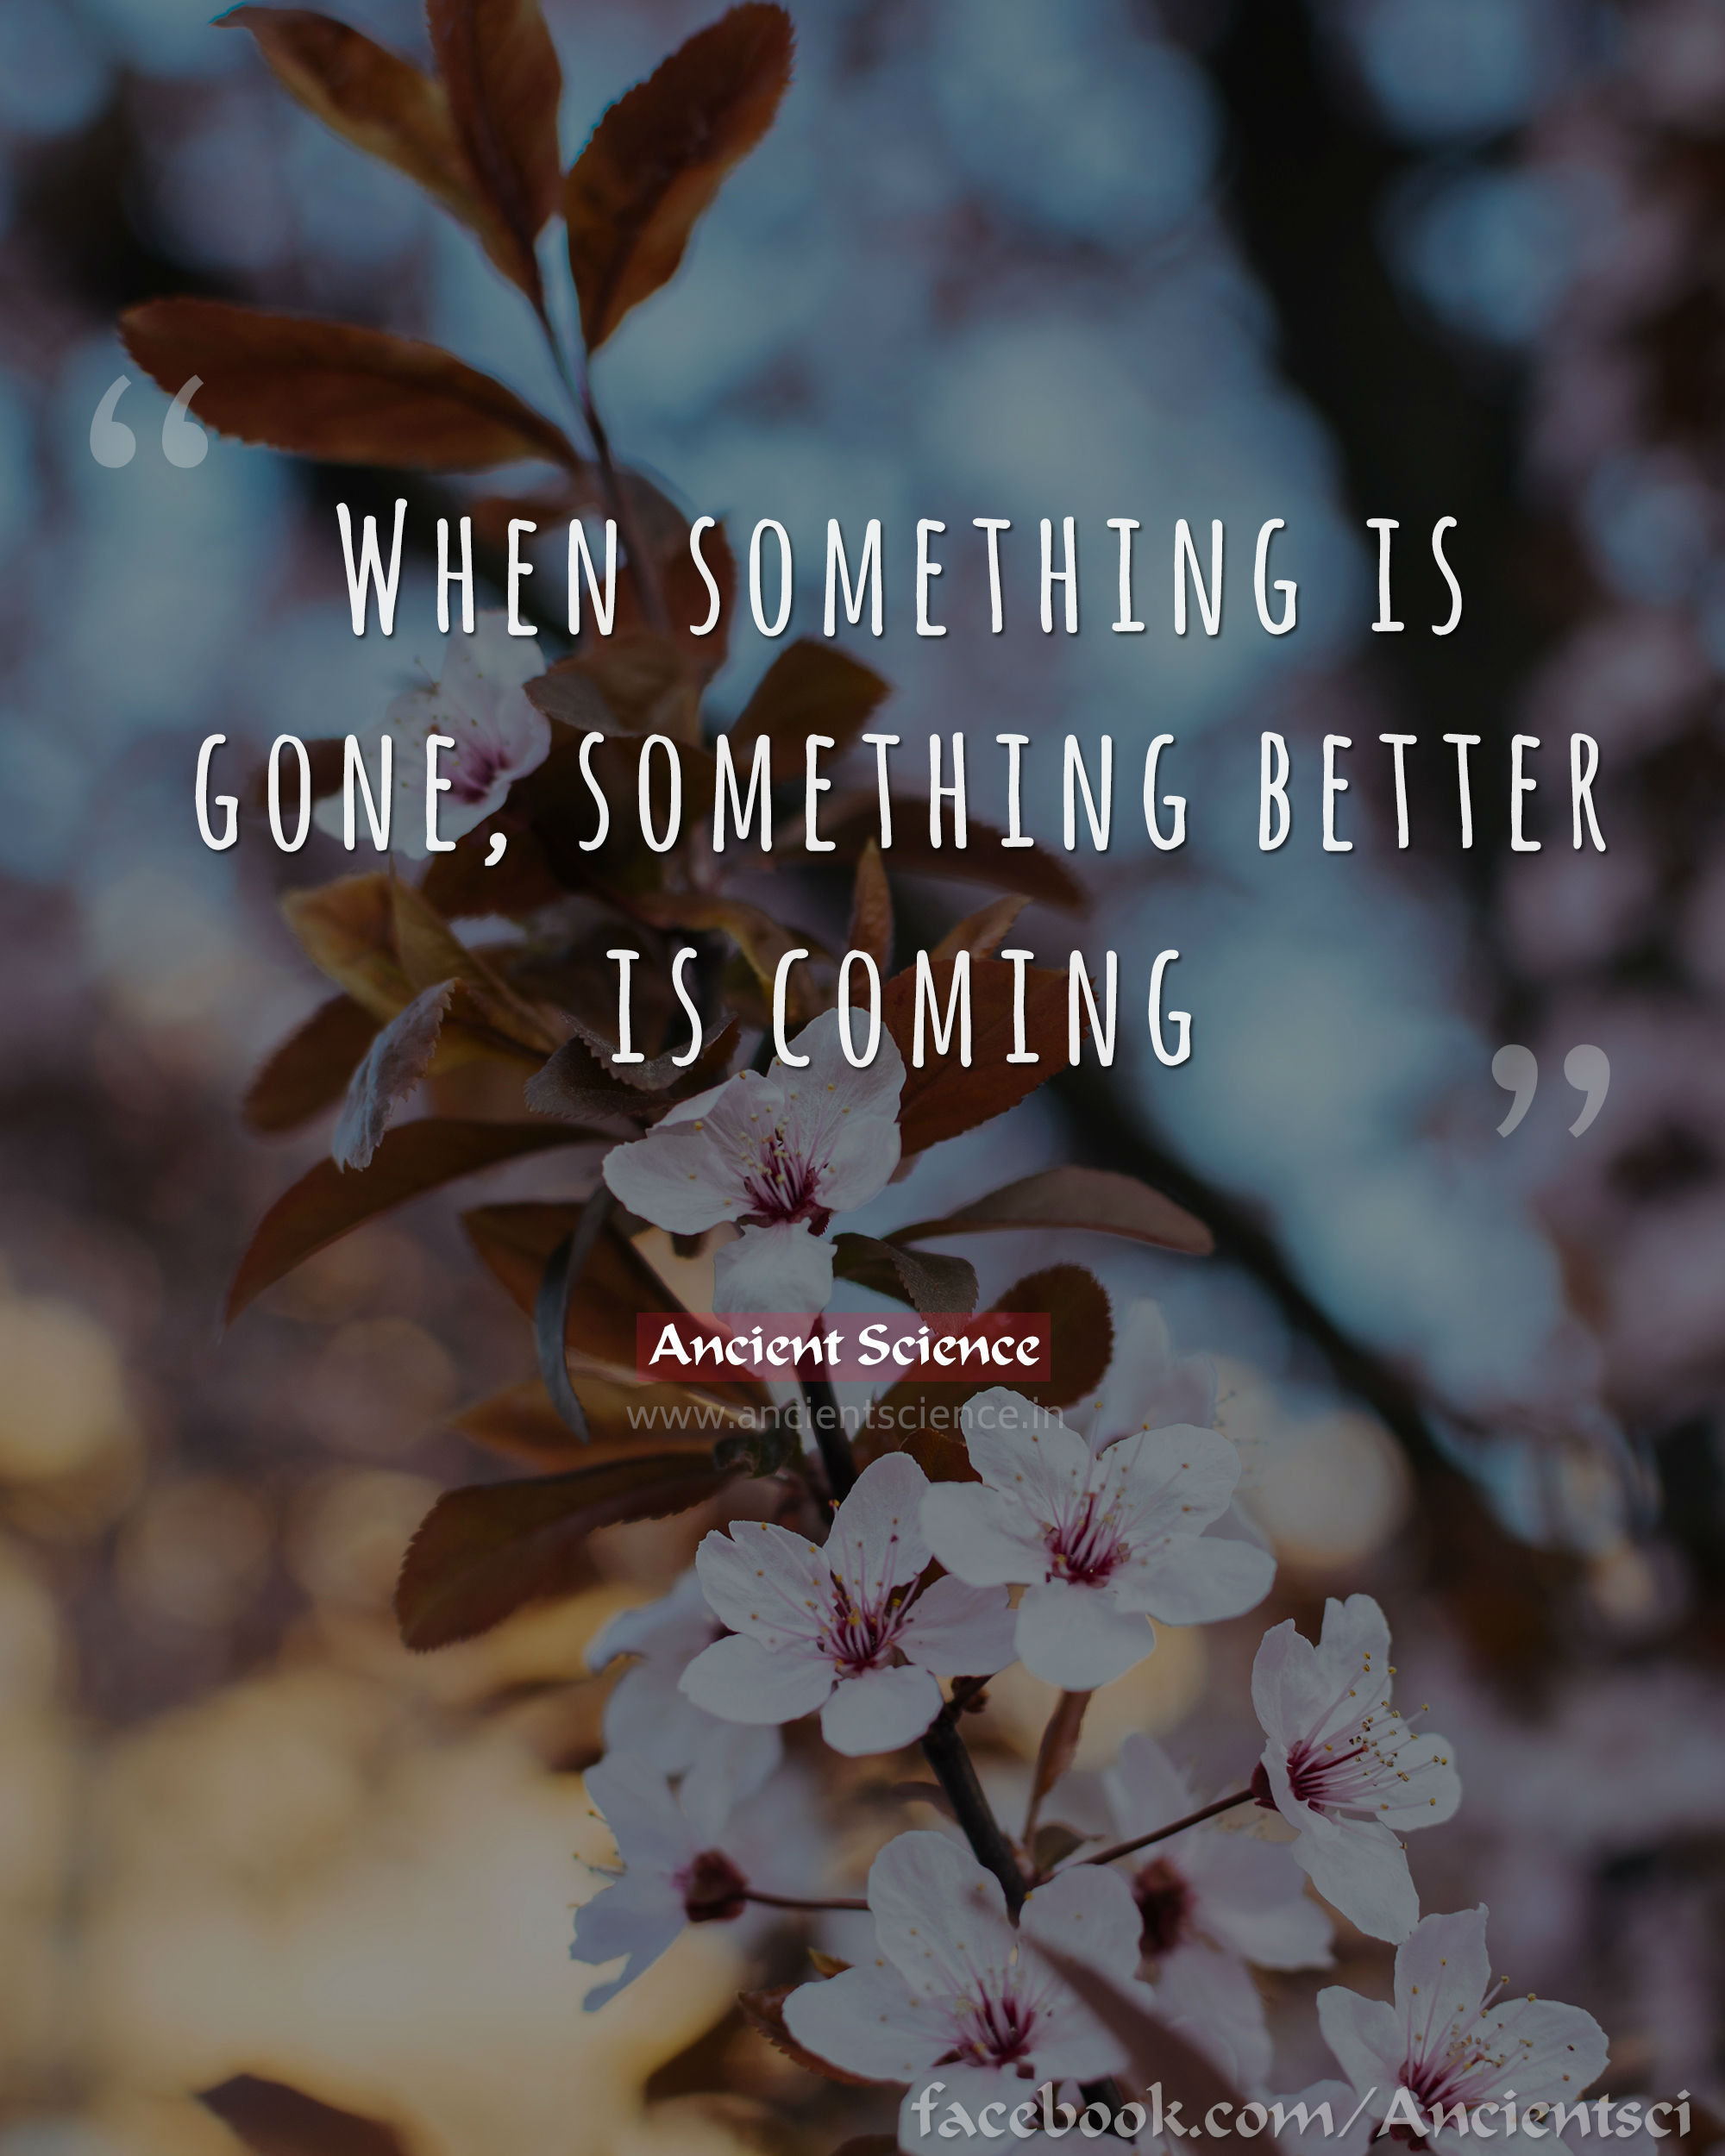 When something is gone, something better is coming